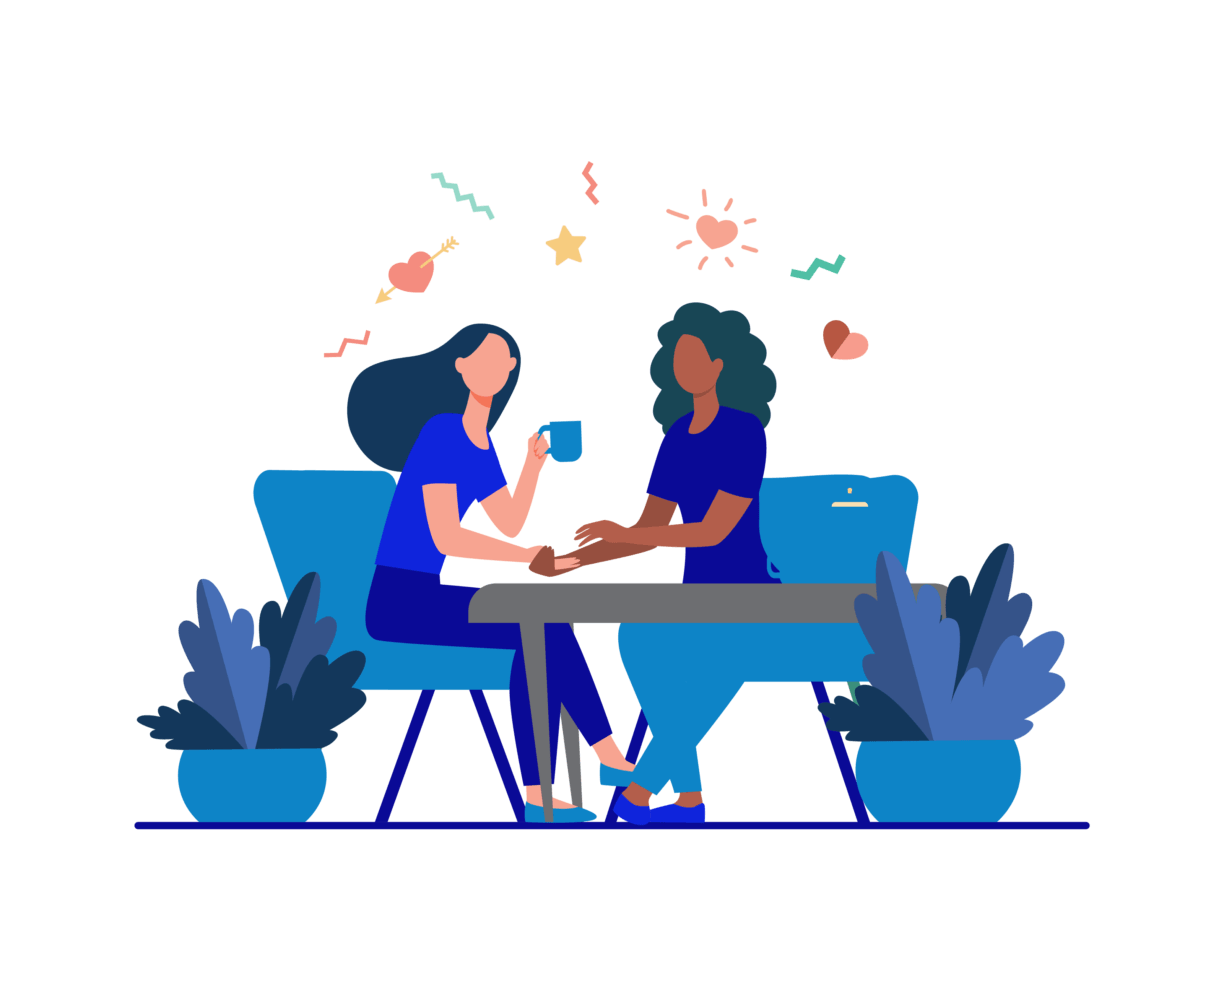 Illustration of two people catching up